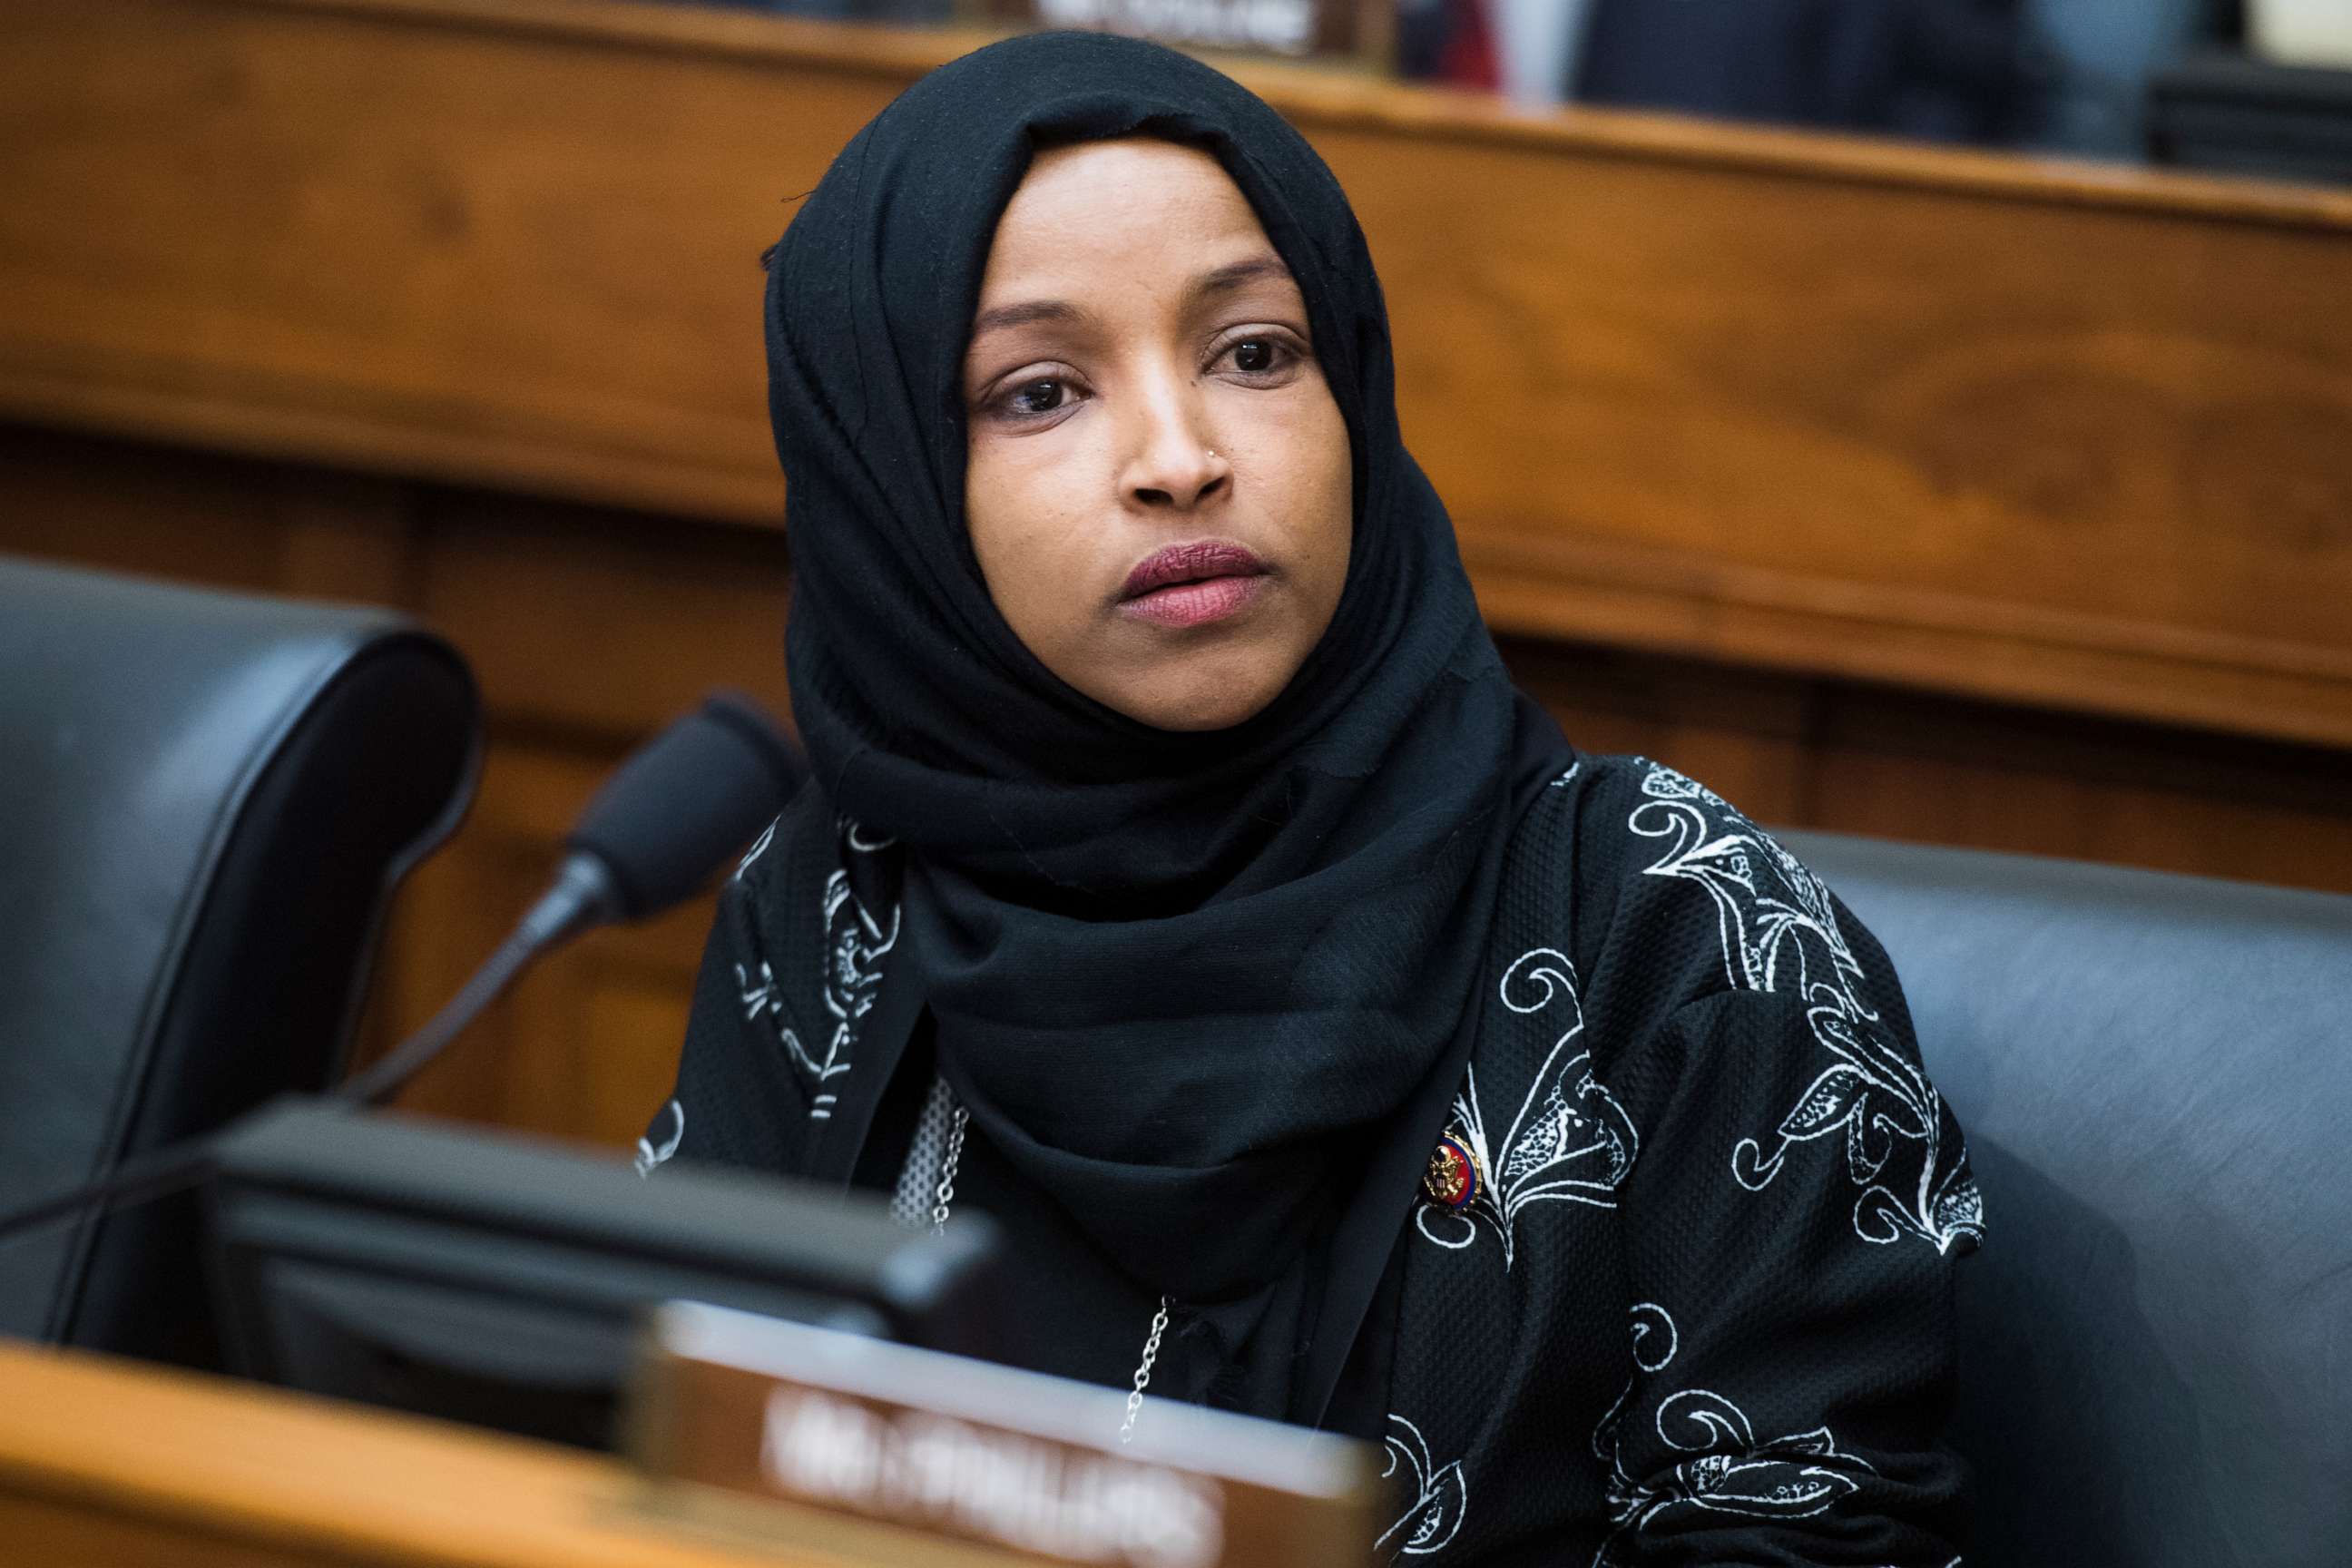 PHOTO: Rep. Ilhan Omar, D-Minn., attends a House Foreign Affairs Committee hearing in Rayburn Building titled "Venezuela at a Crossroads," Feb. 13, 2019, in Washington.